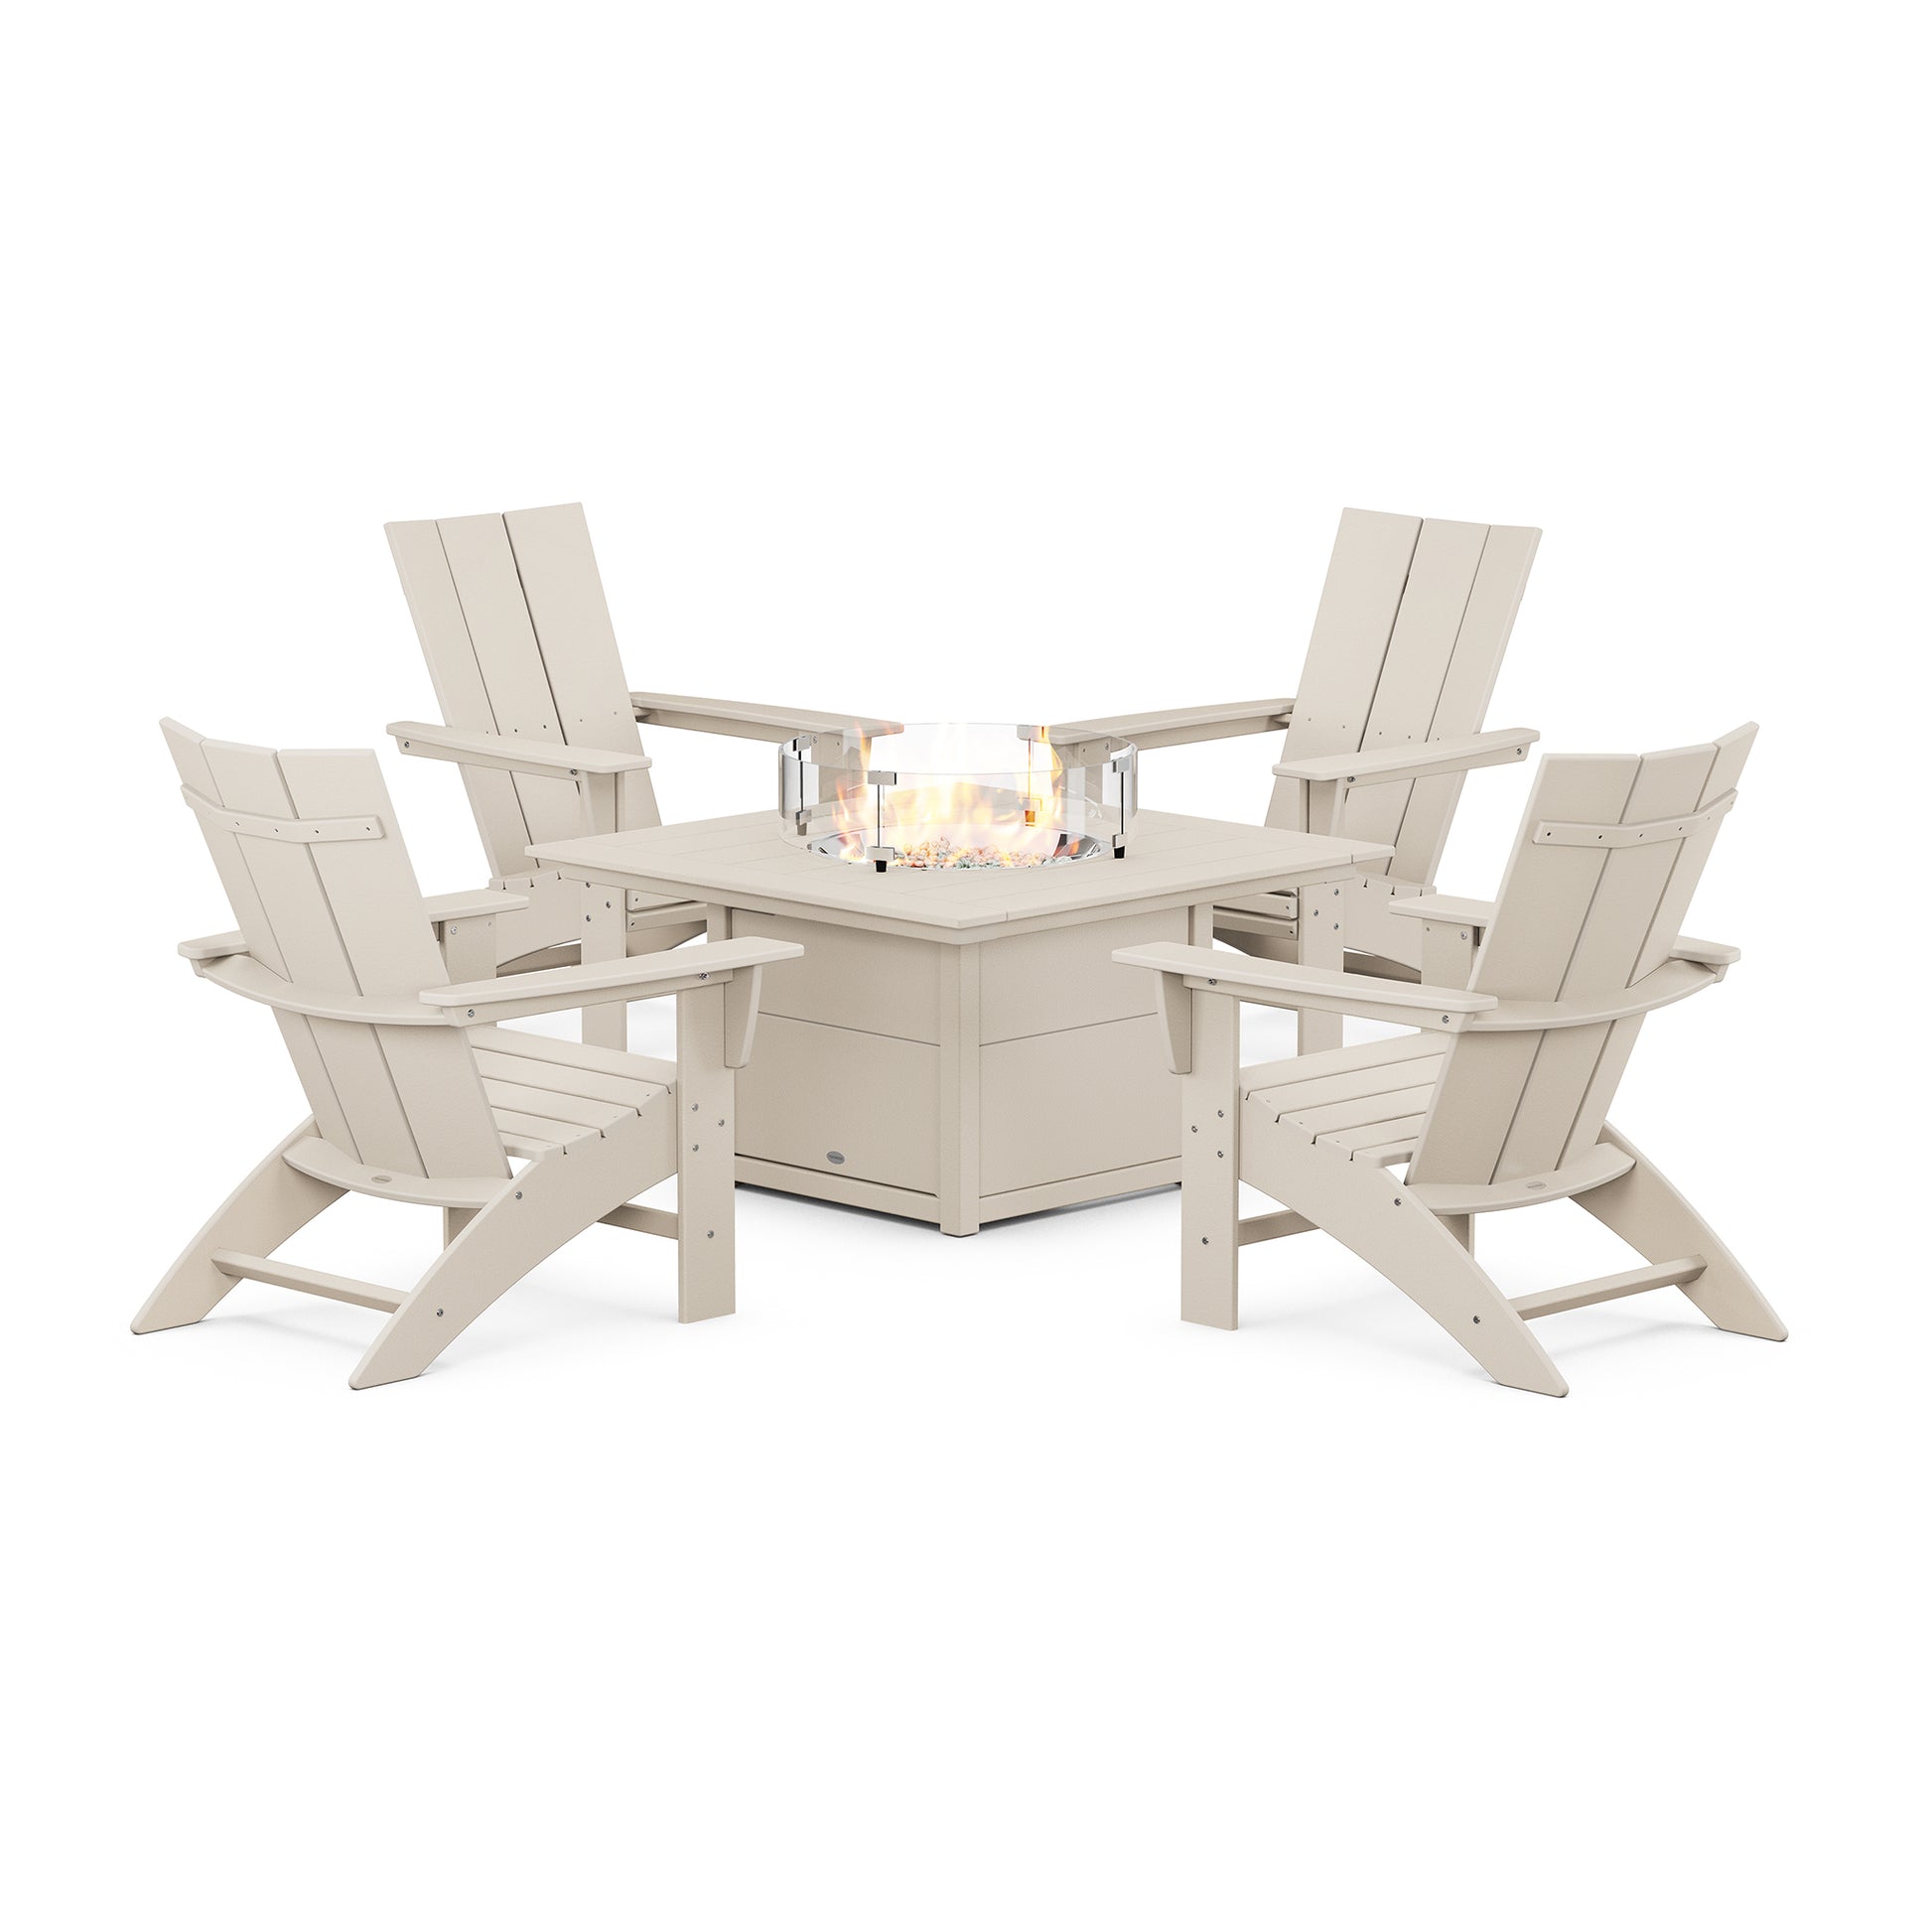 Four off-white POLYWOOD Modern Curveback Adirondack Chairs arranged around a hexagonal outdoor POLYWOOD fire pit table on a white background. The fire pit is lit, showcasing a warm flame.